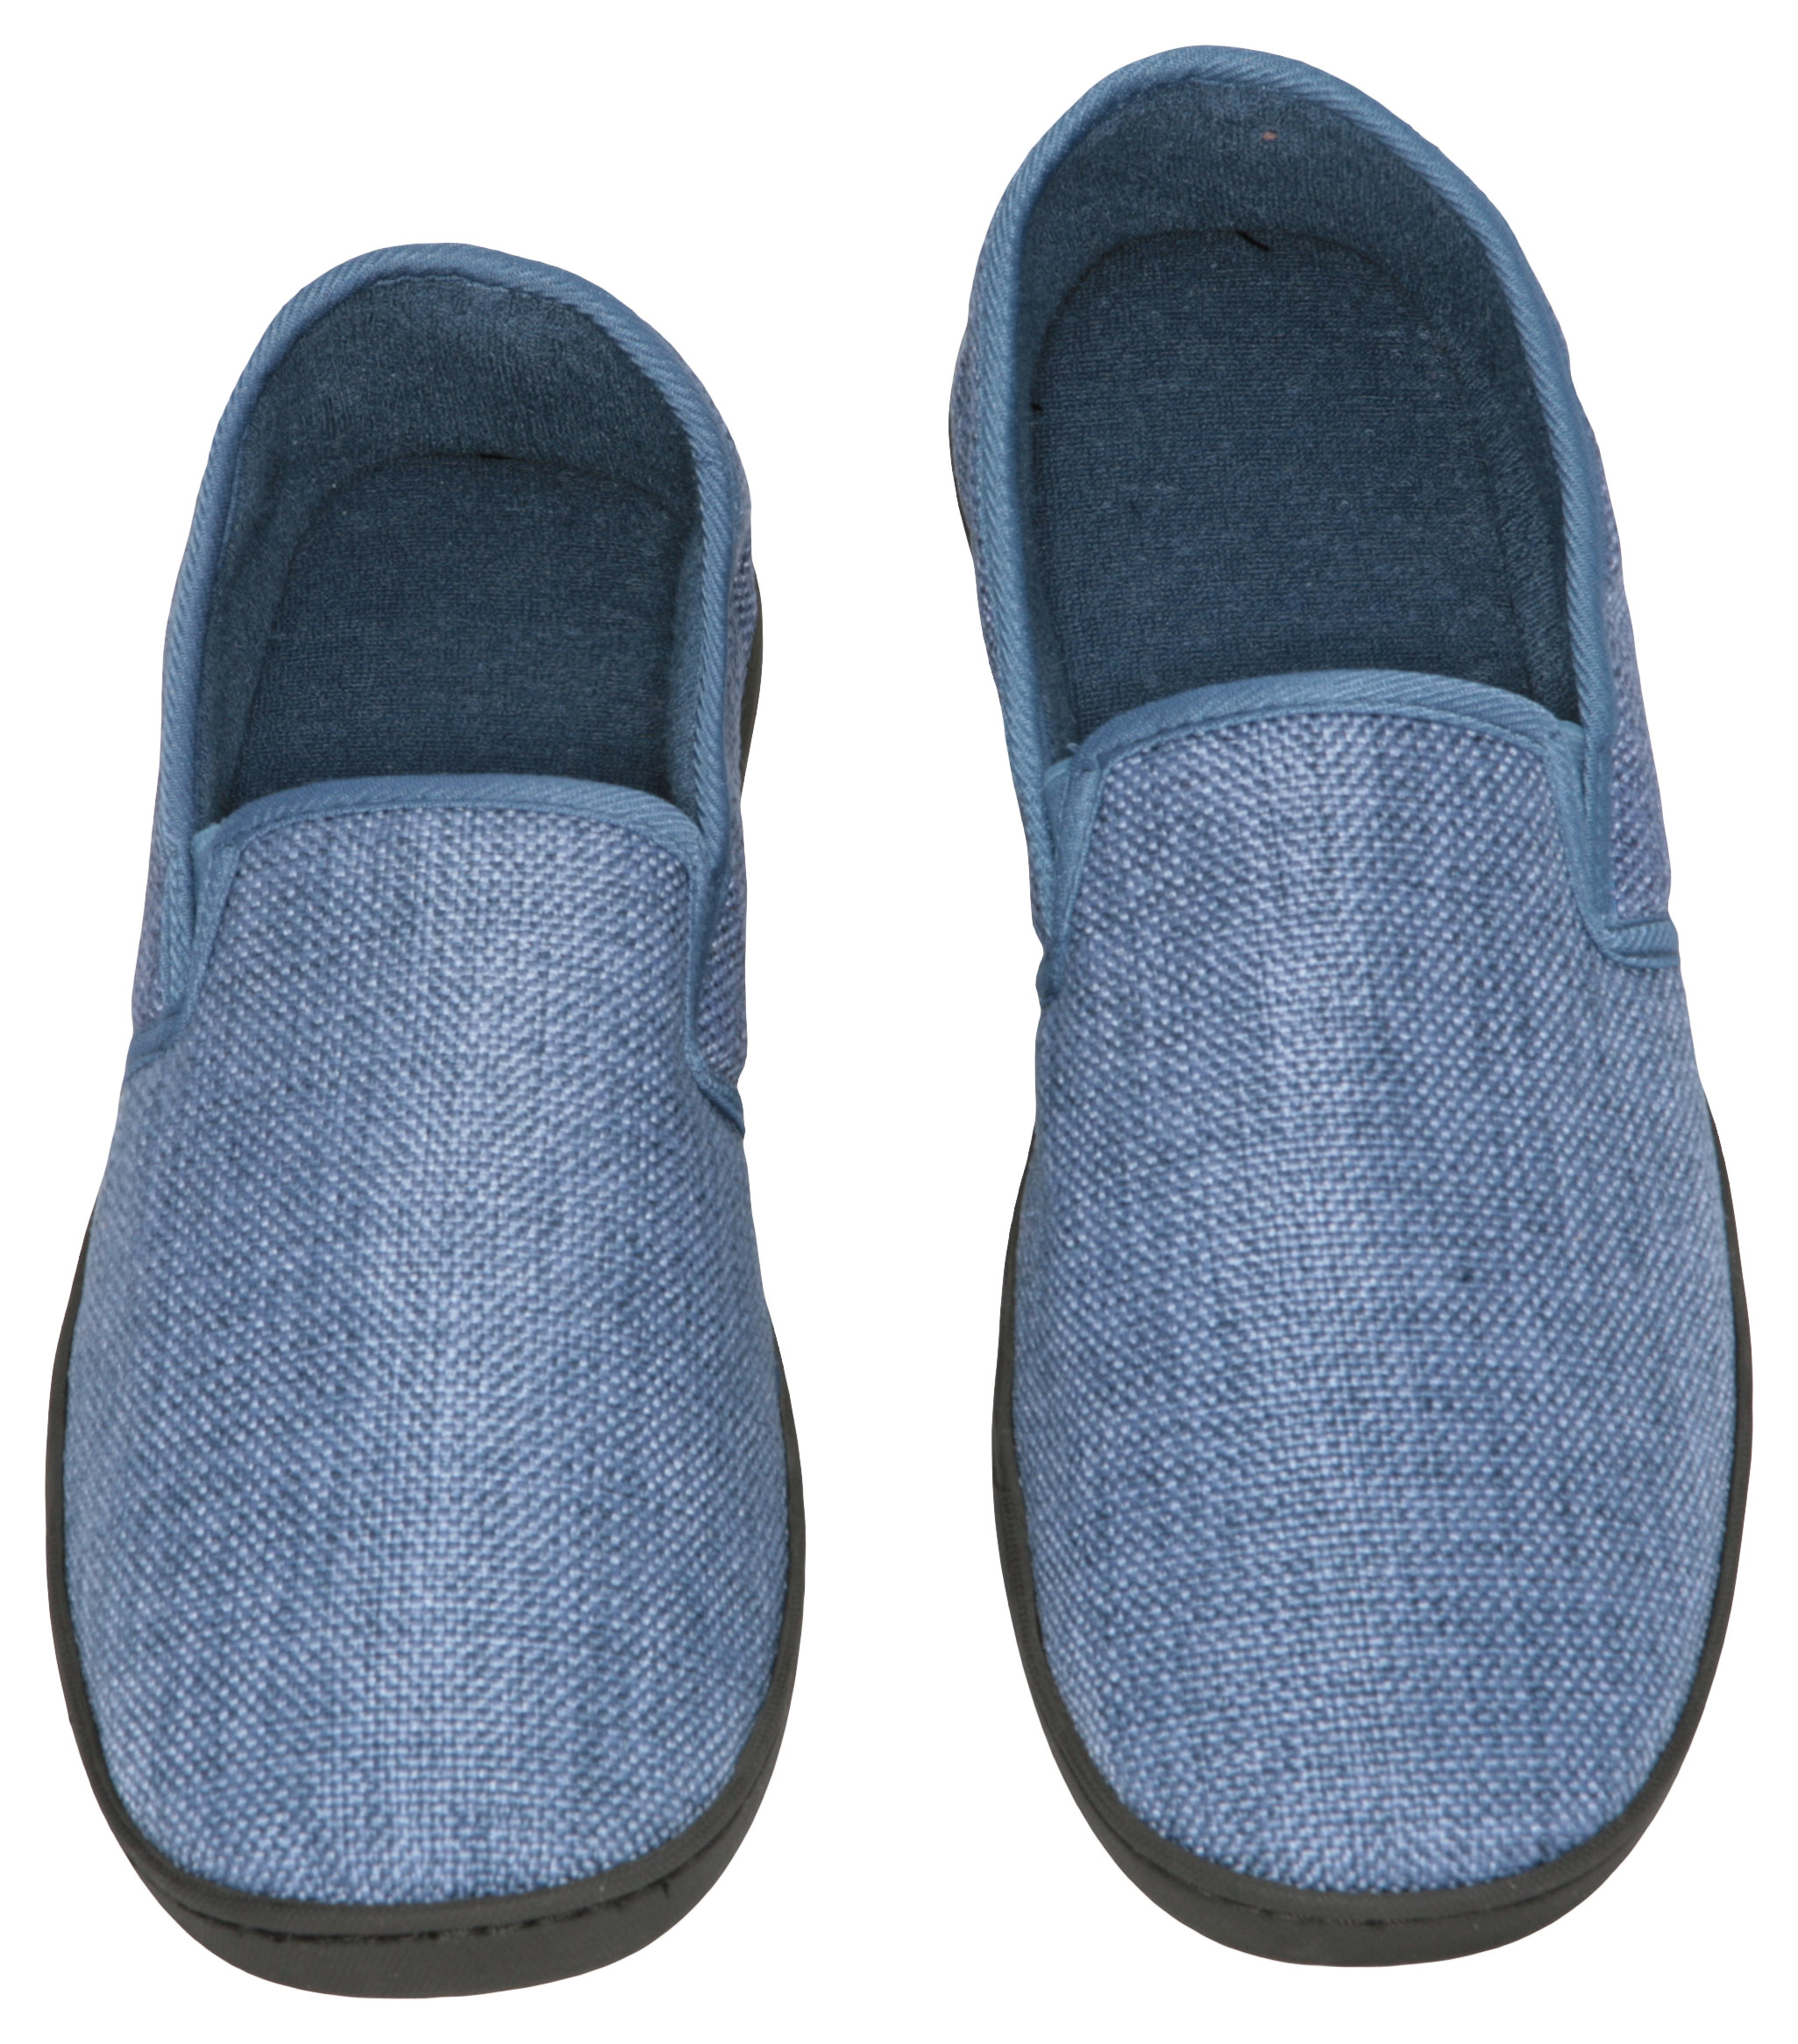 Deluxe Comfort Men's Memory Foam Slipper, Size 9-10 – Soft Linen 120D SBR Insole and Rubber Outsole – Pure Suede Shoes – Non-Marking Sole – Men's Slippers, Blue - image 3 of 5